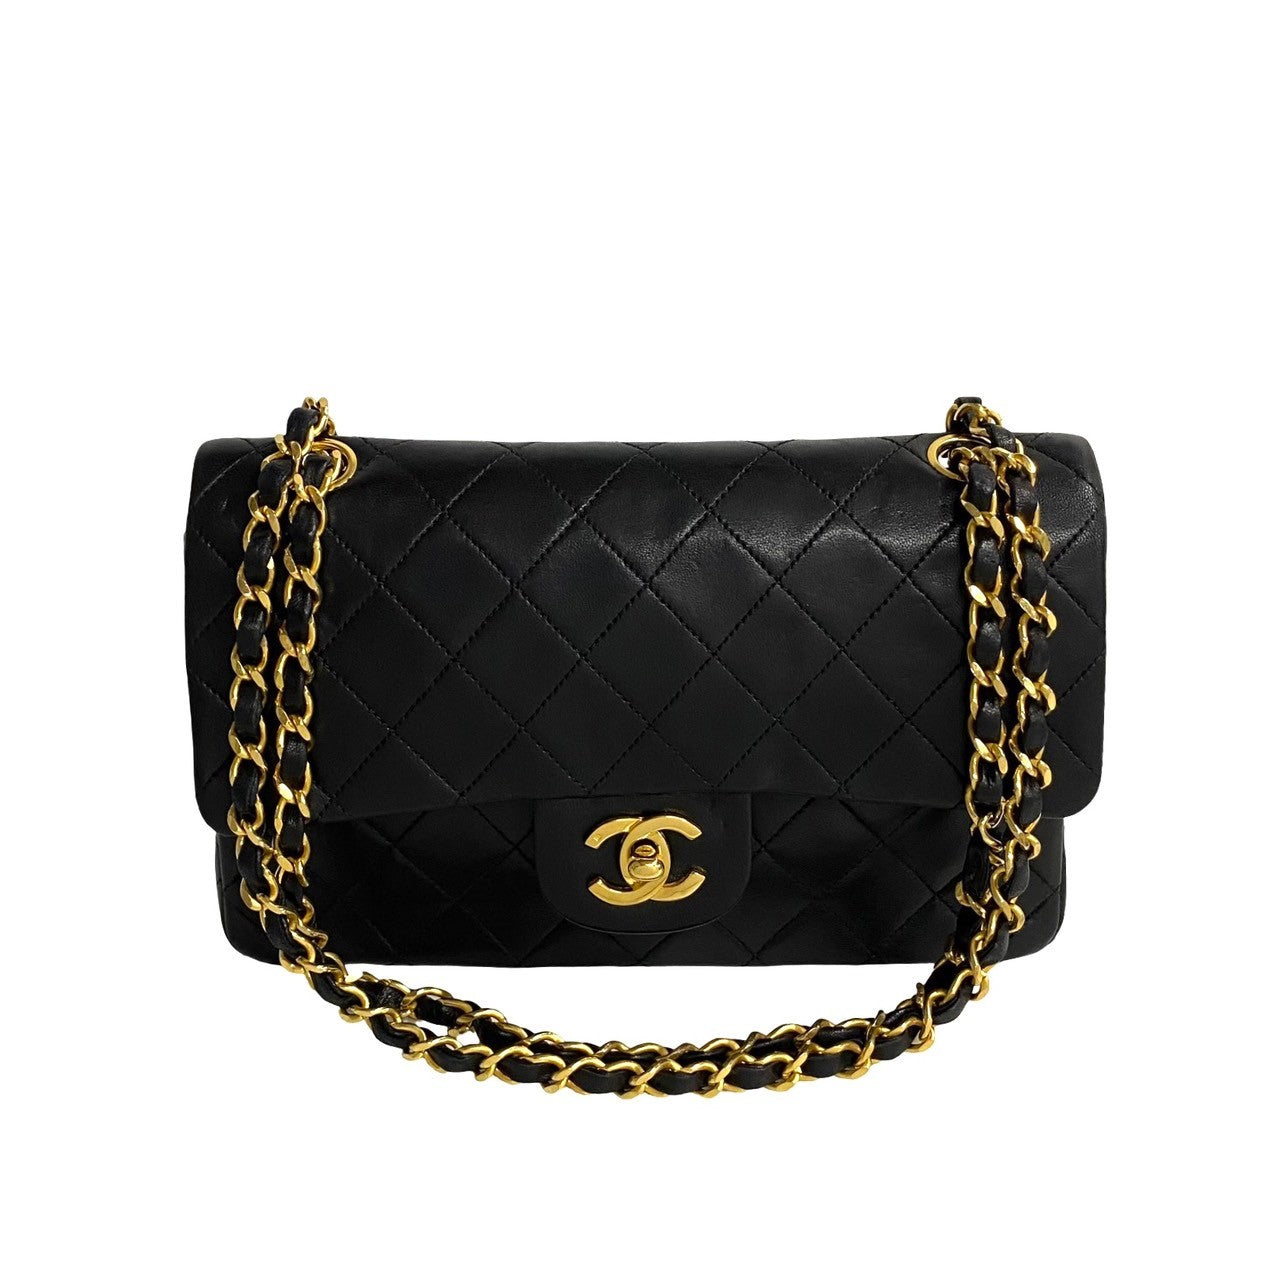 Chanel Small Classic Double Flap Bag  Leather Handbag in Good condition